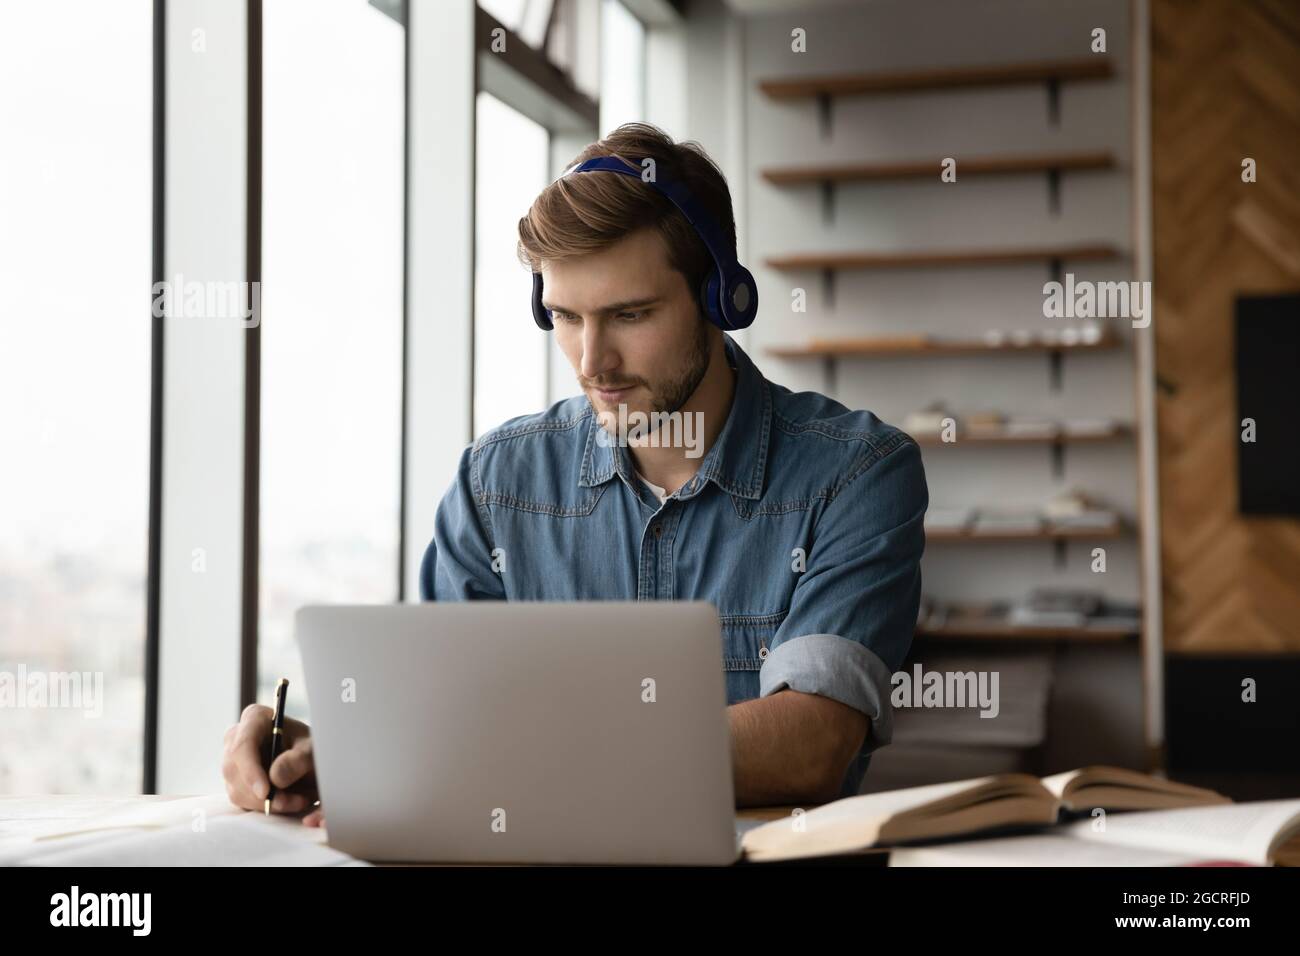 Focused adult student guy in headphones listening to learning seminar Stock Photo